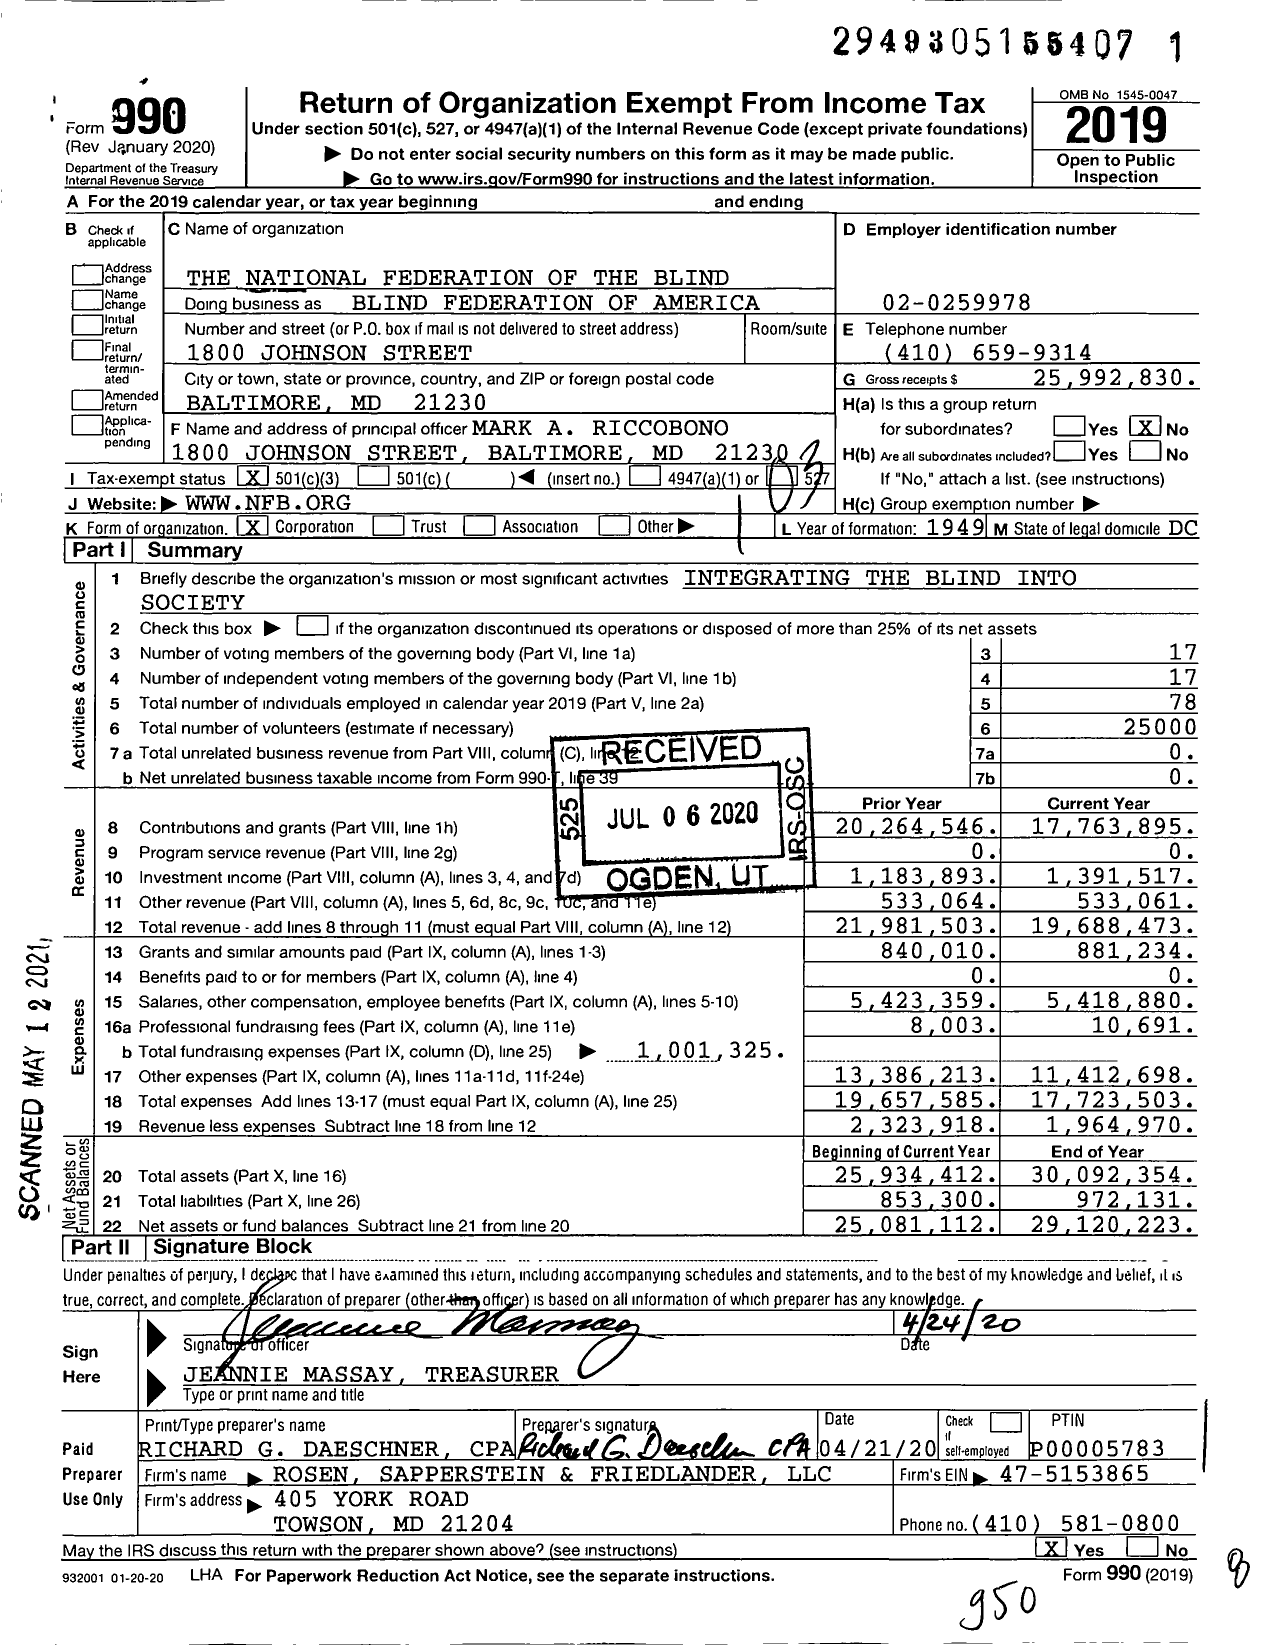 Image of first page of 2019 Form 990 for Blind Federation of America (NFB)